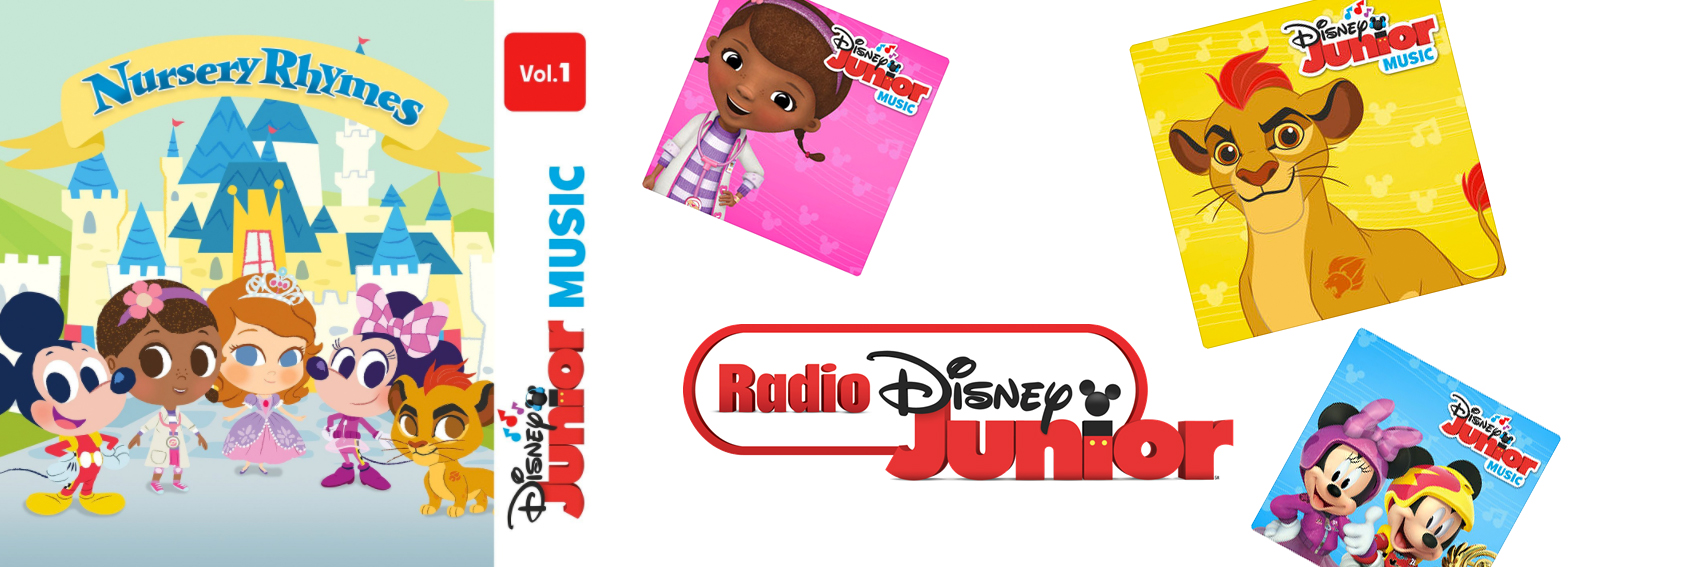 Disney Junior Music Radio Station Launches On Apple Music Today, Friday, September 22, With "Disney Junior Music: Nursery Rhymes Collection" And 5 New EPs